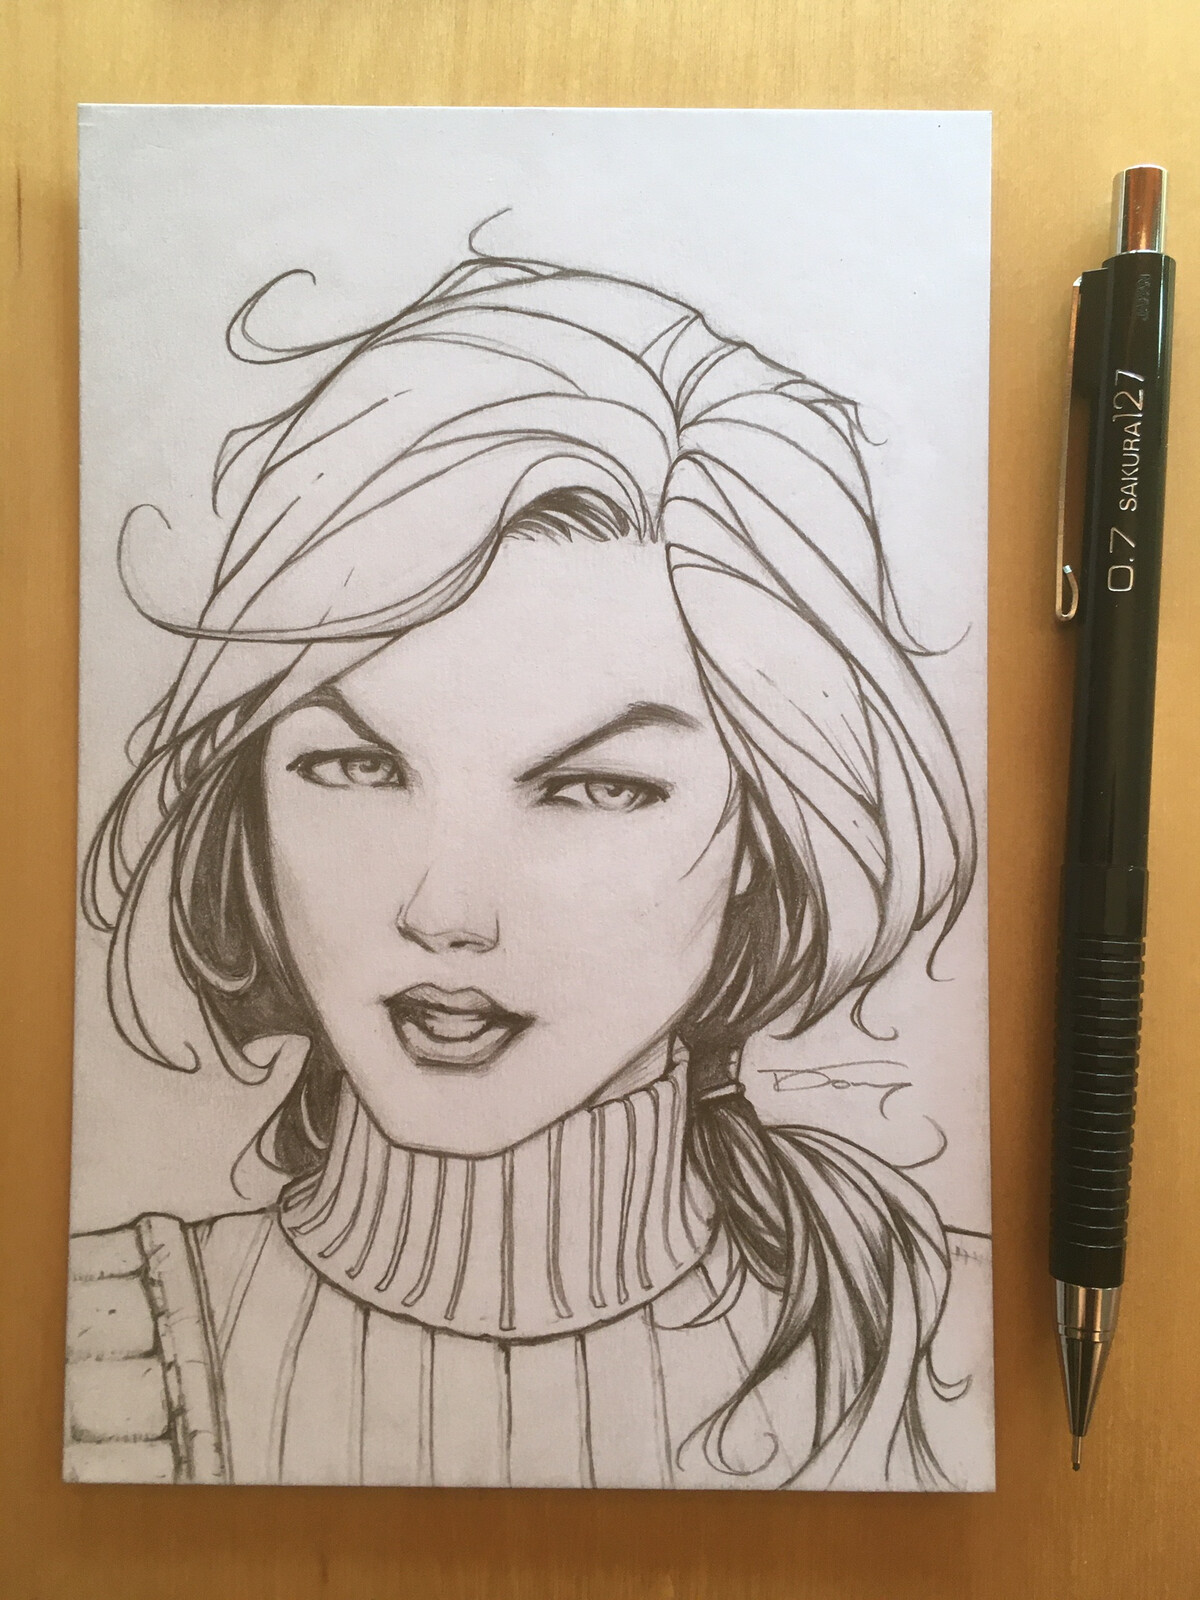 G.I. Joe's Scarlett head sketch.
Drawn in pencil on 100 lbs white card stock
4 x 6 inch

If you're interested in a commission like this one, please visit my shop for more details!
https://donnydtran.bigcartel.com/